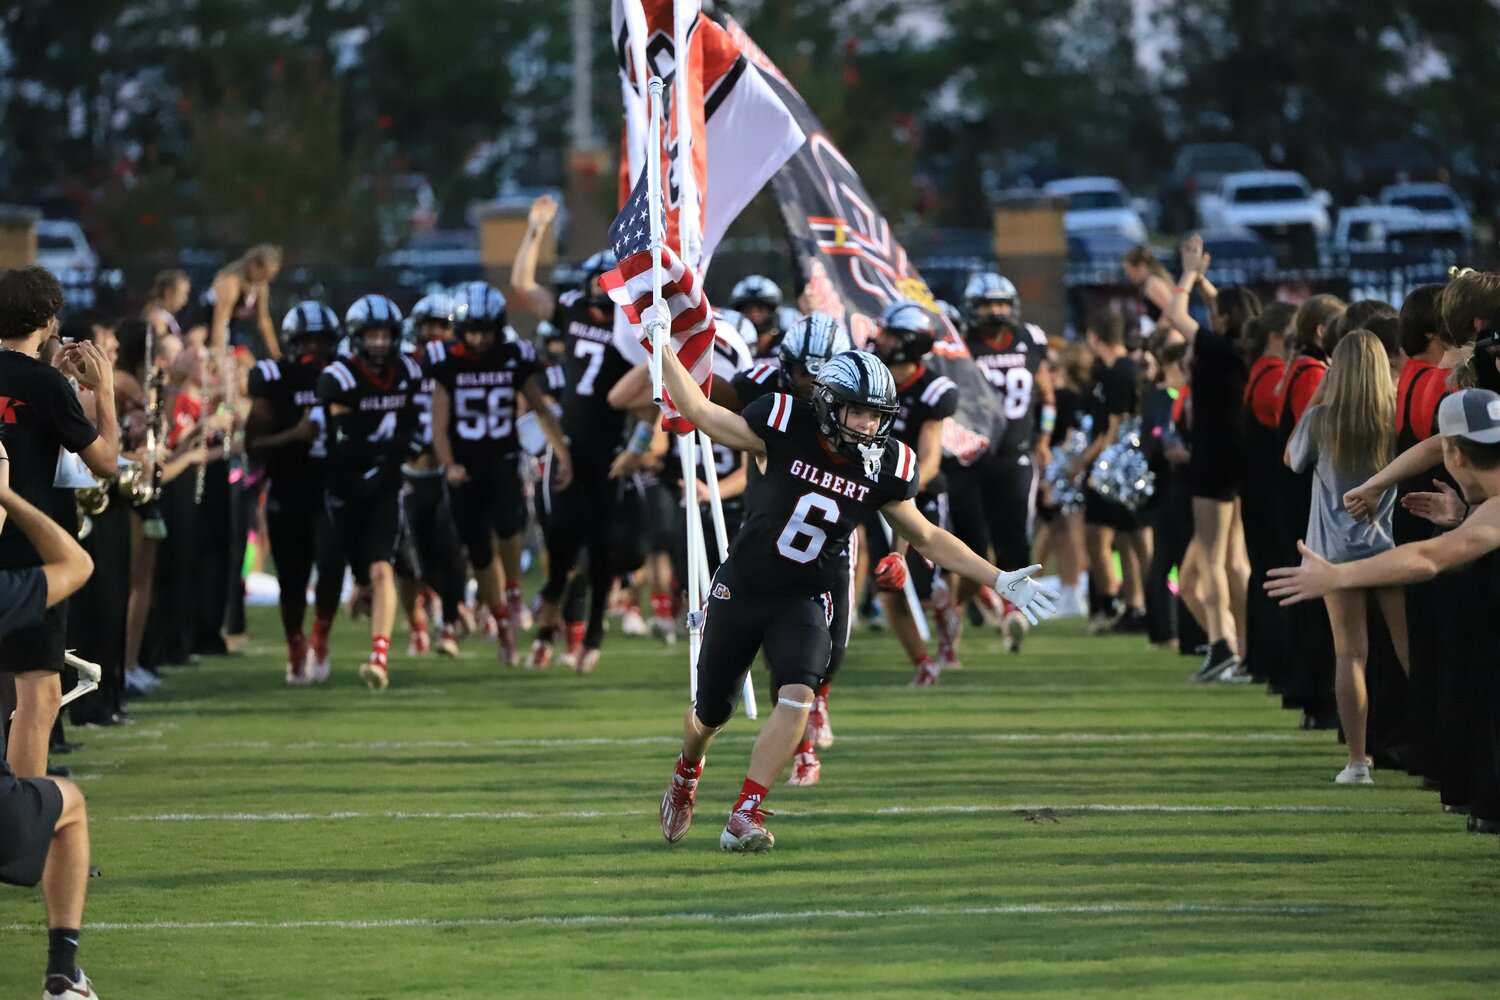 CJ Browning leads Gilbert on to the field before their 14-3 upset win over Lexington.